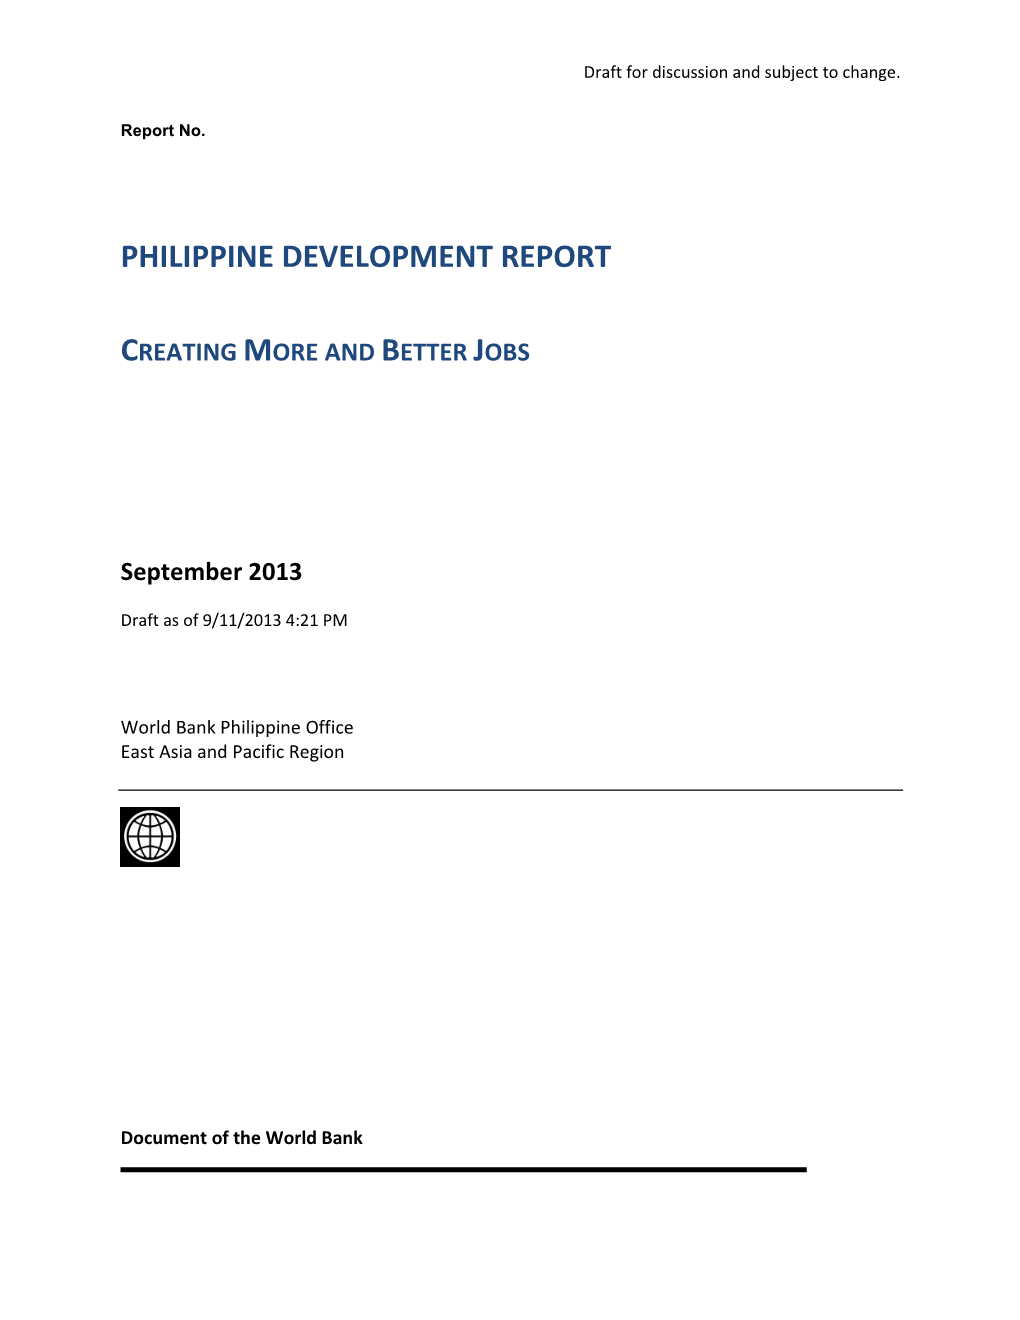 Philippine Development Report Creating More and Better Jobs